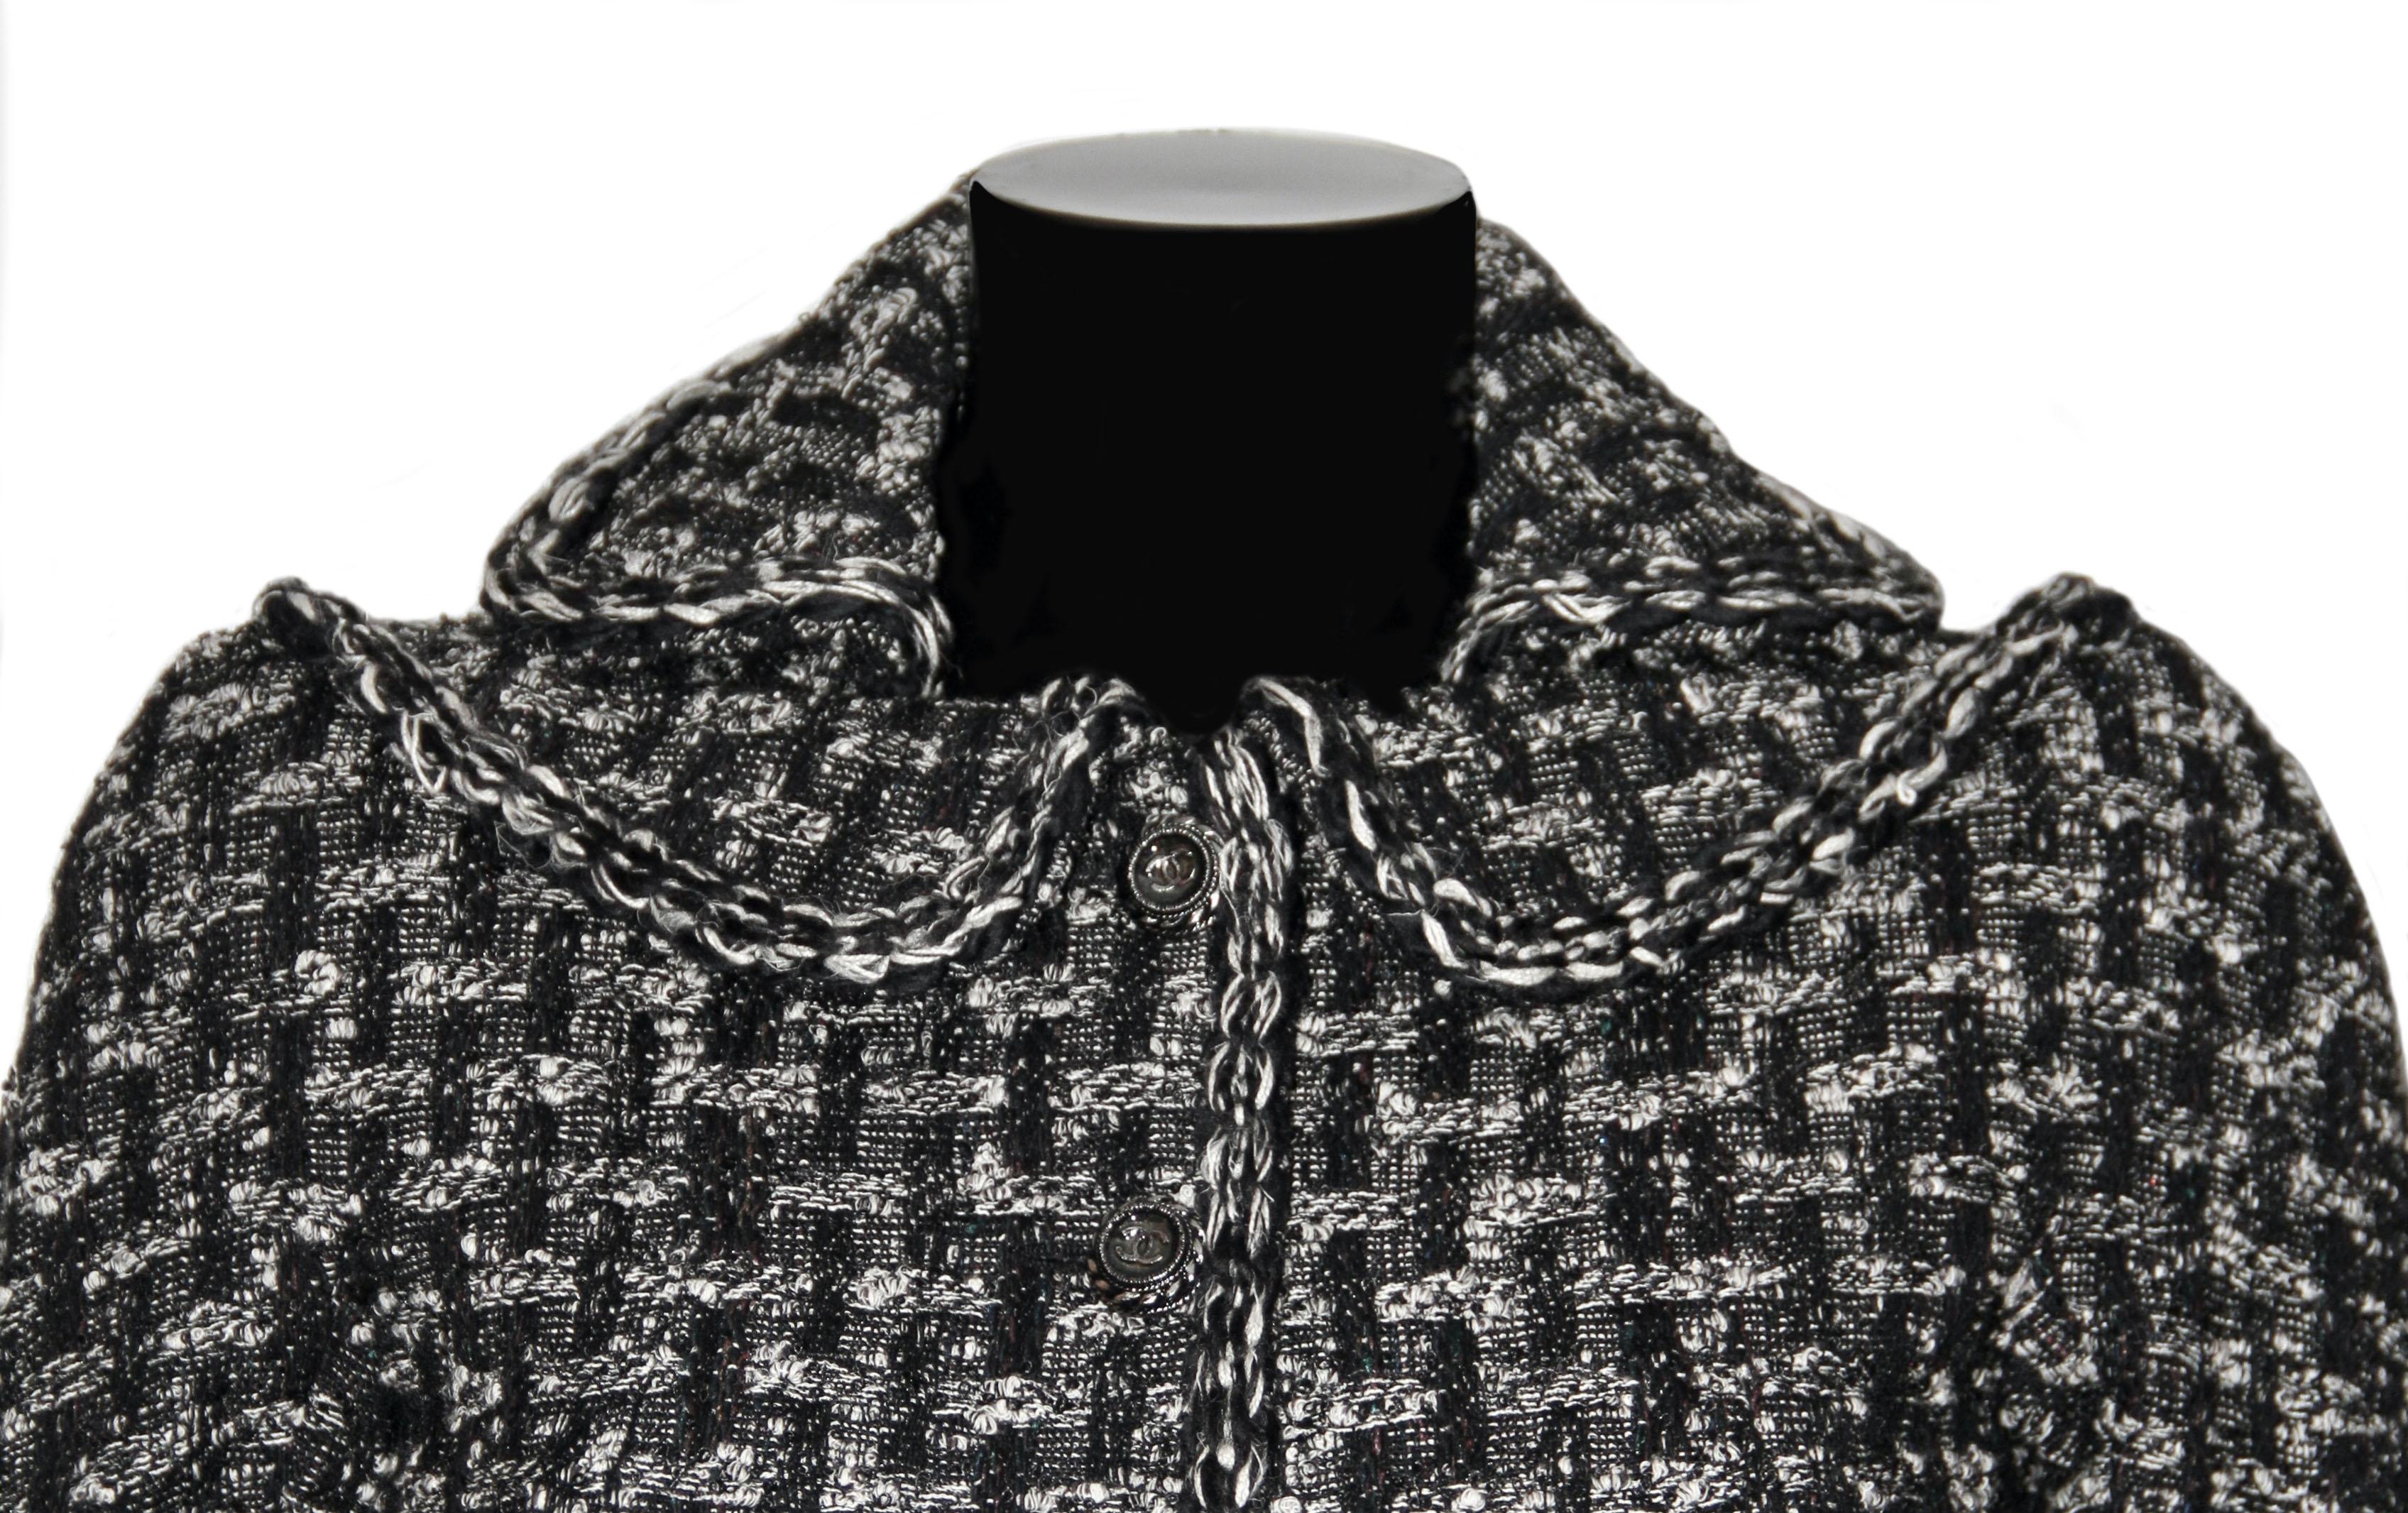 Classic with a twist for this pre-owned tweed jacket from the house of Chanel.
Slightly fitted with a double collar detail, this jacket is crafted in a beautiful black and white tweed, favorite of Chanel.
2 front flap pockets with a CC button and 5x